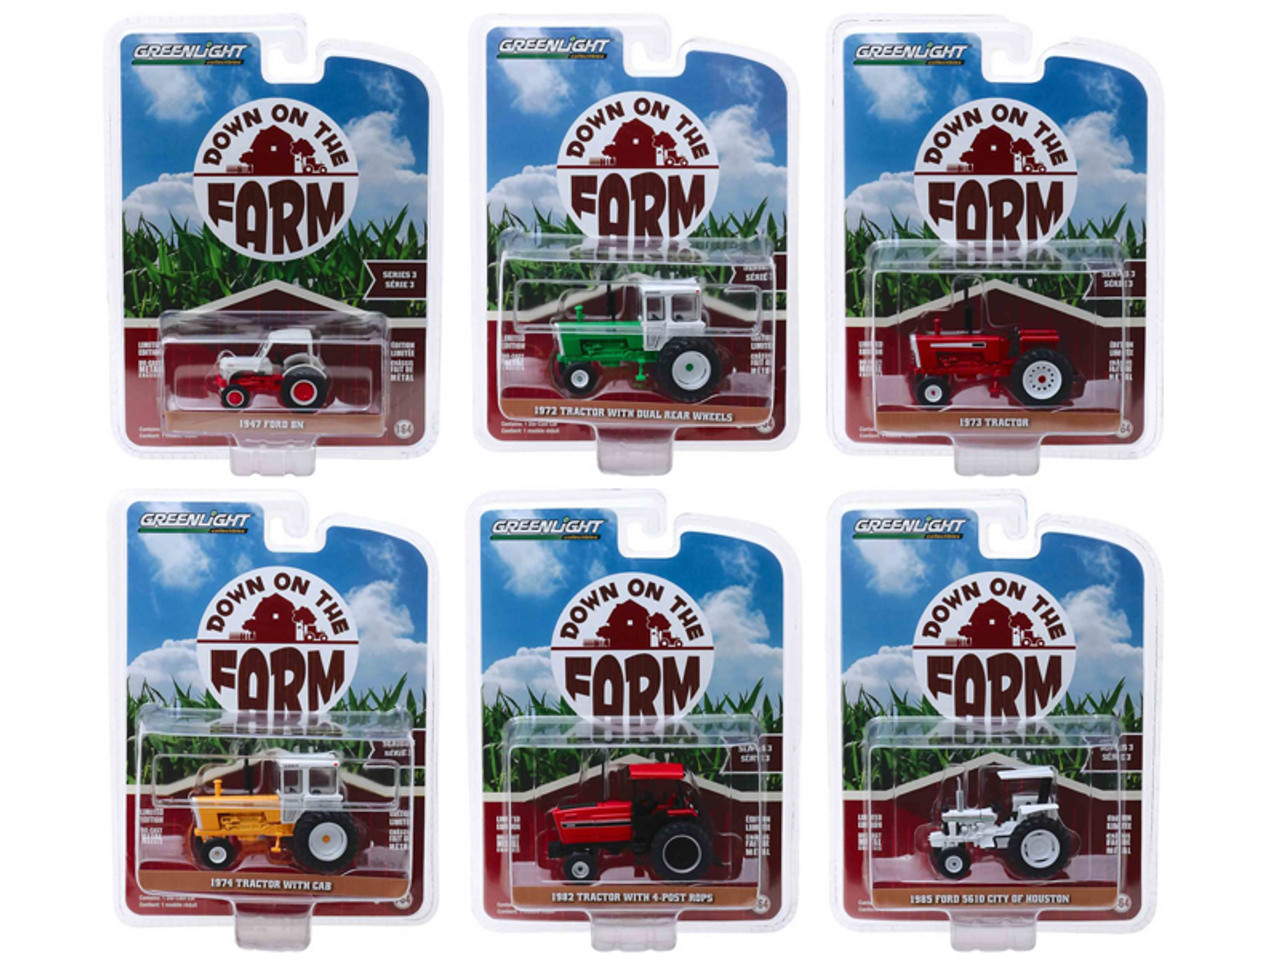 "Down on the Farm" Series 3, Set of 6 pieces 1/64 Diecast Models by Greenlight